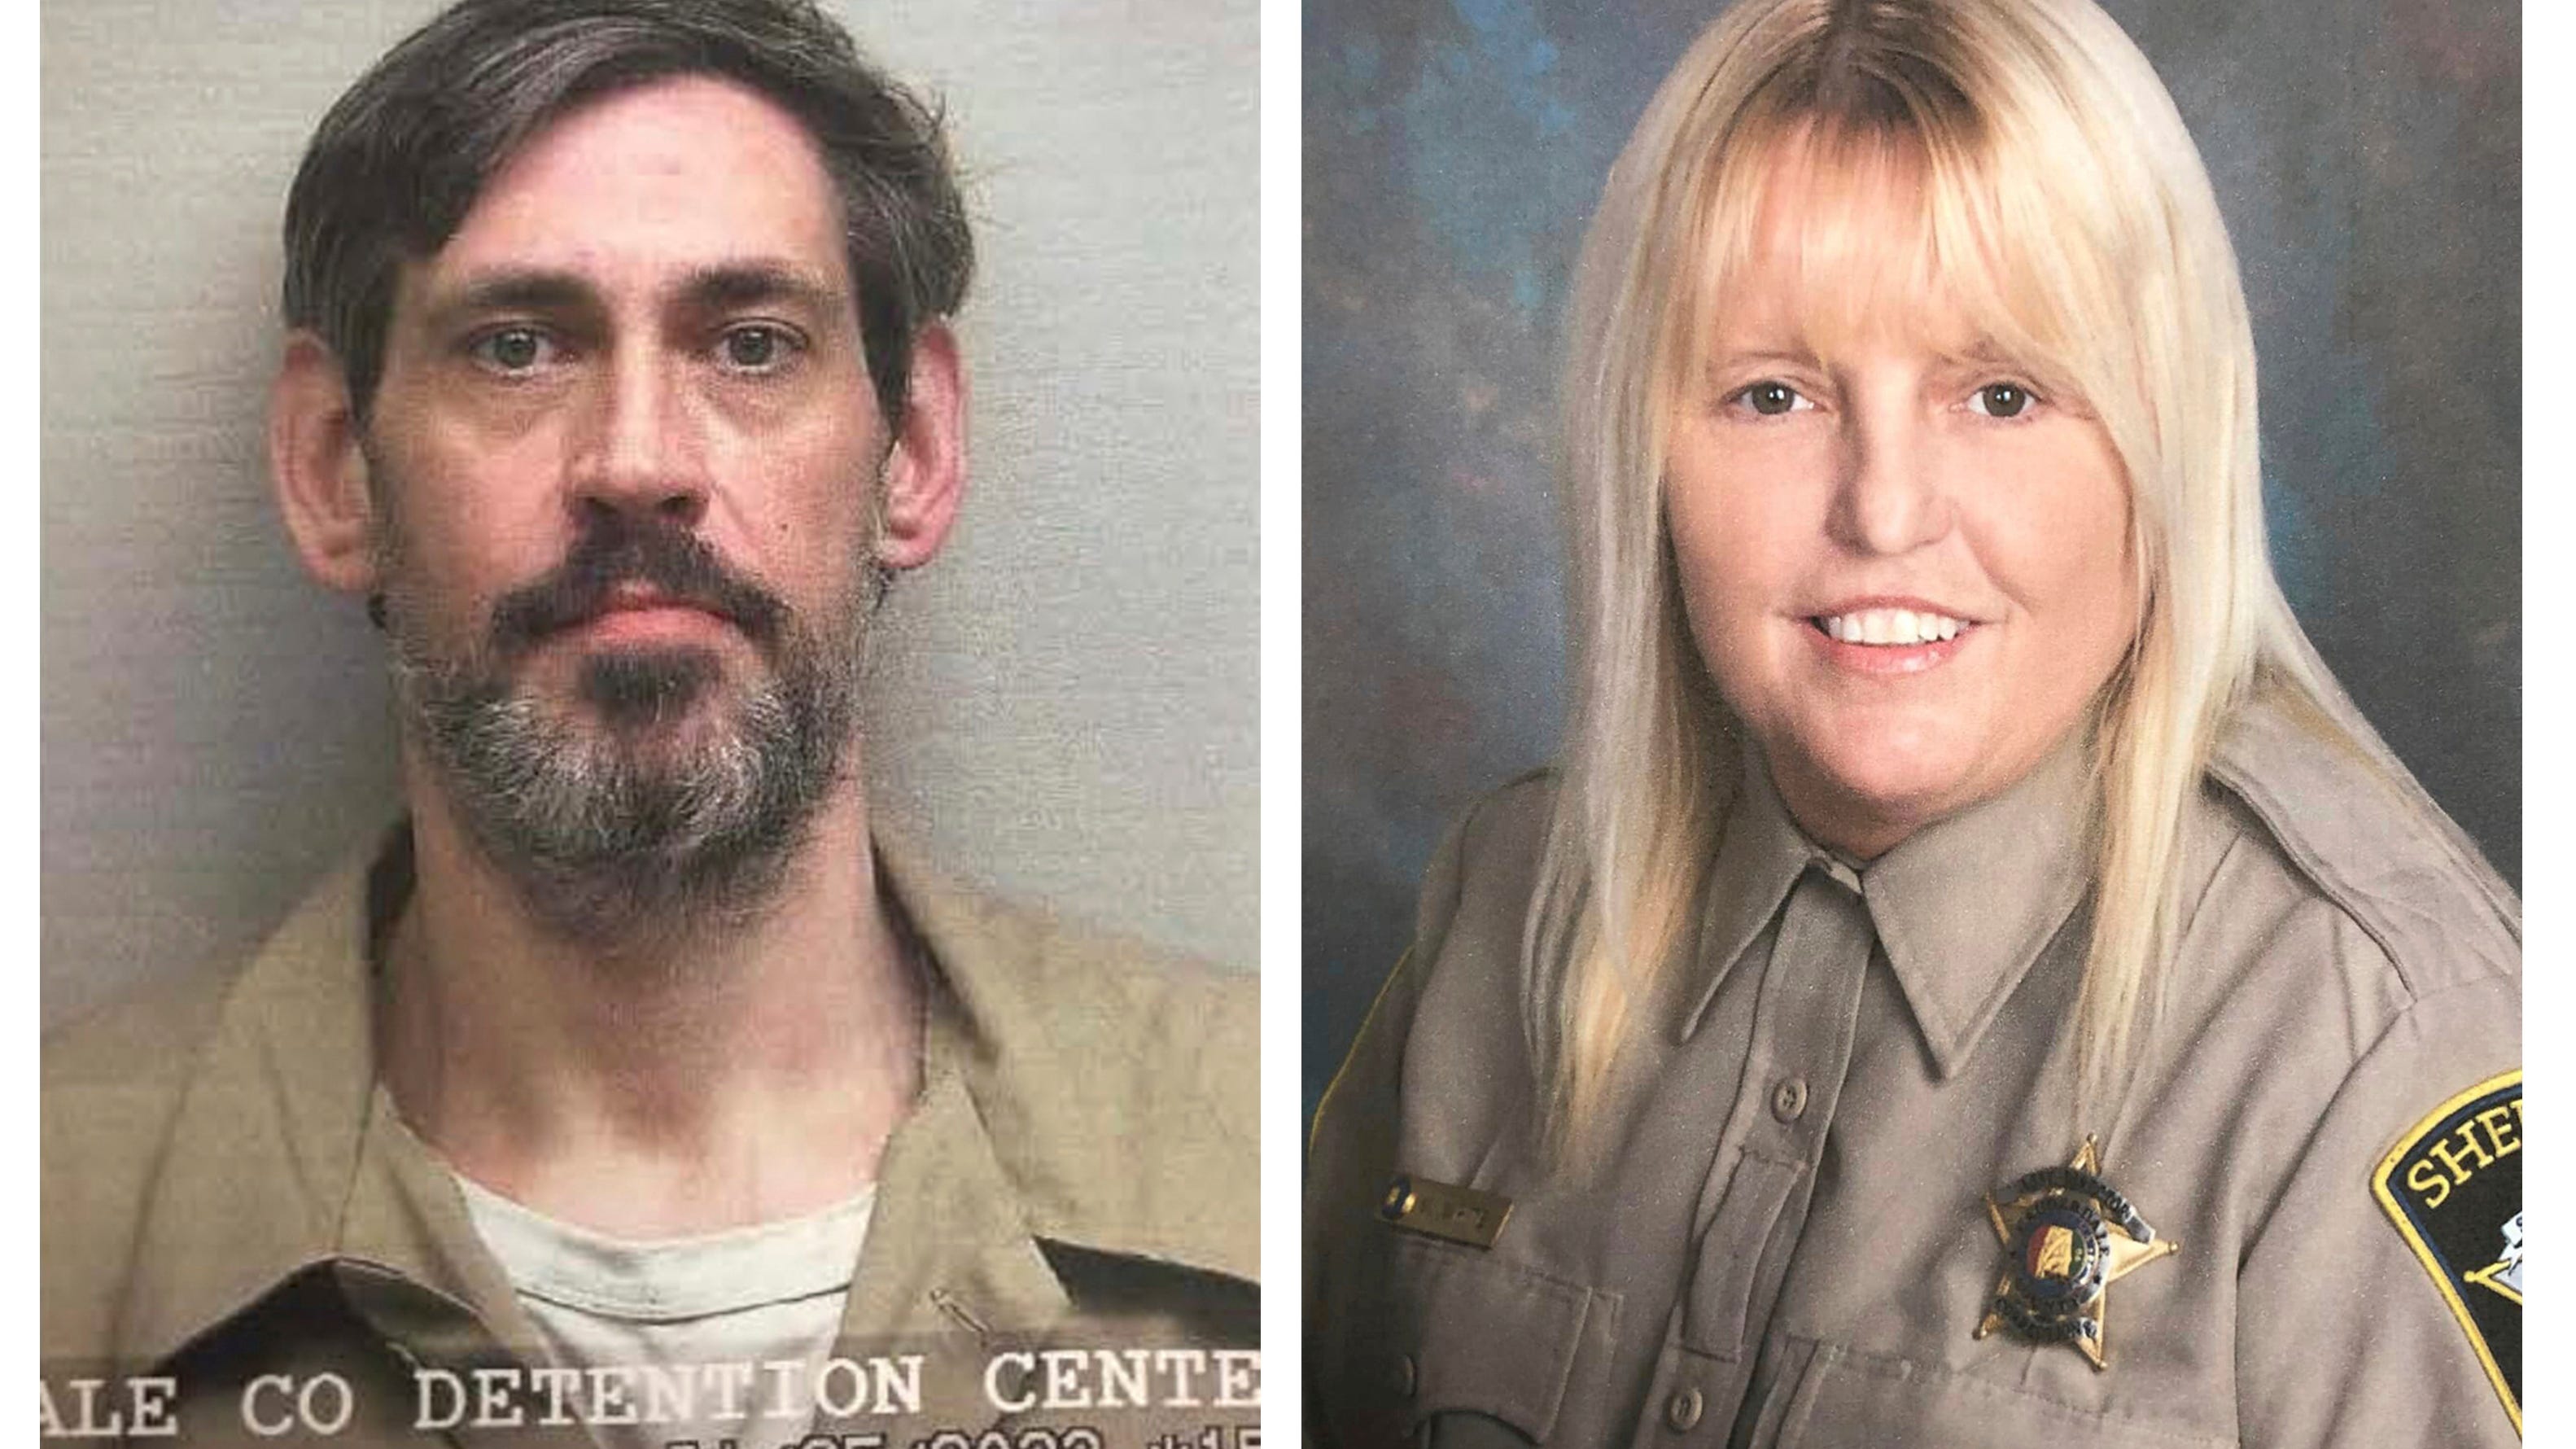 Hunt for Alabama fugitives comes to an end: What we know about ex-officer’s death, inmate’s arrest